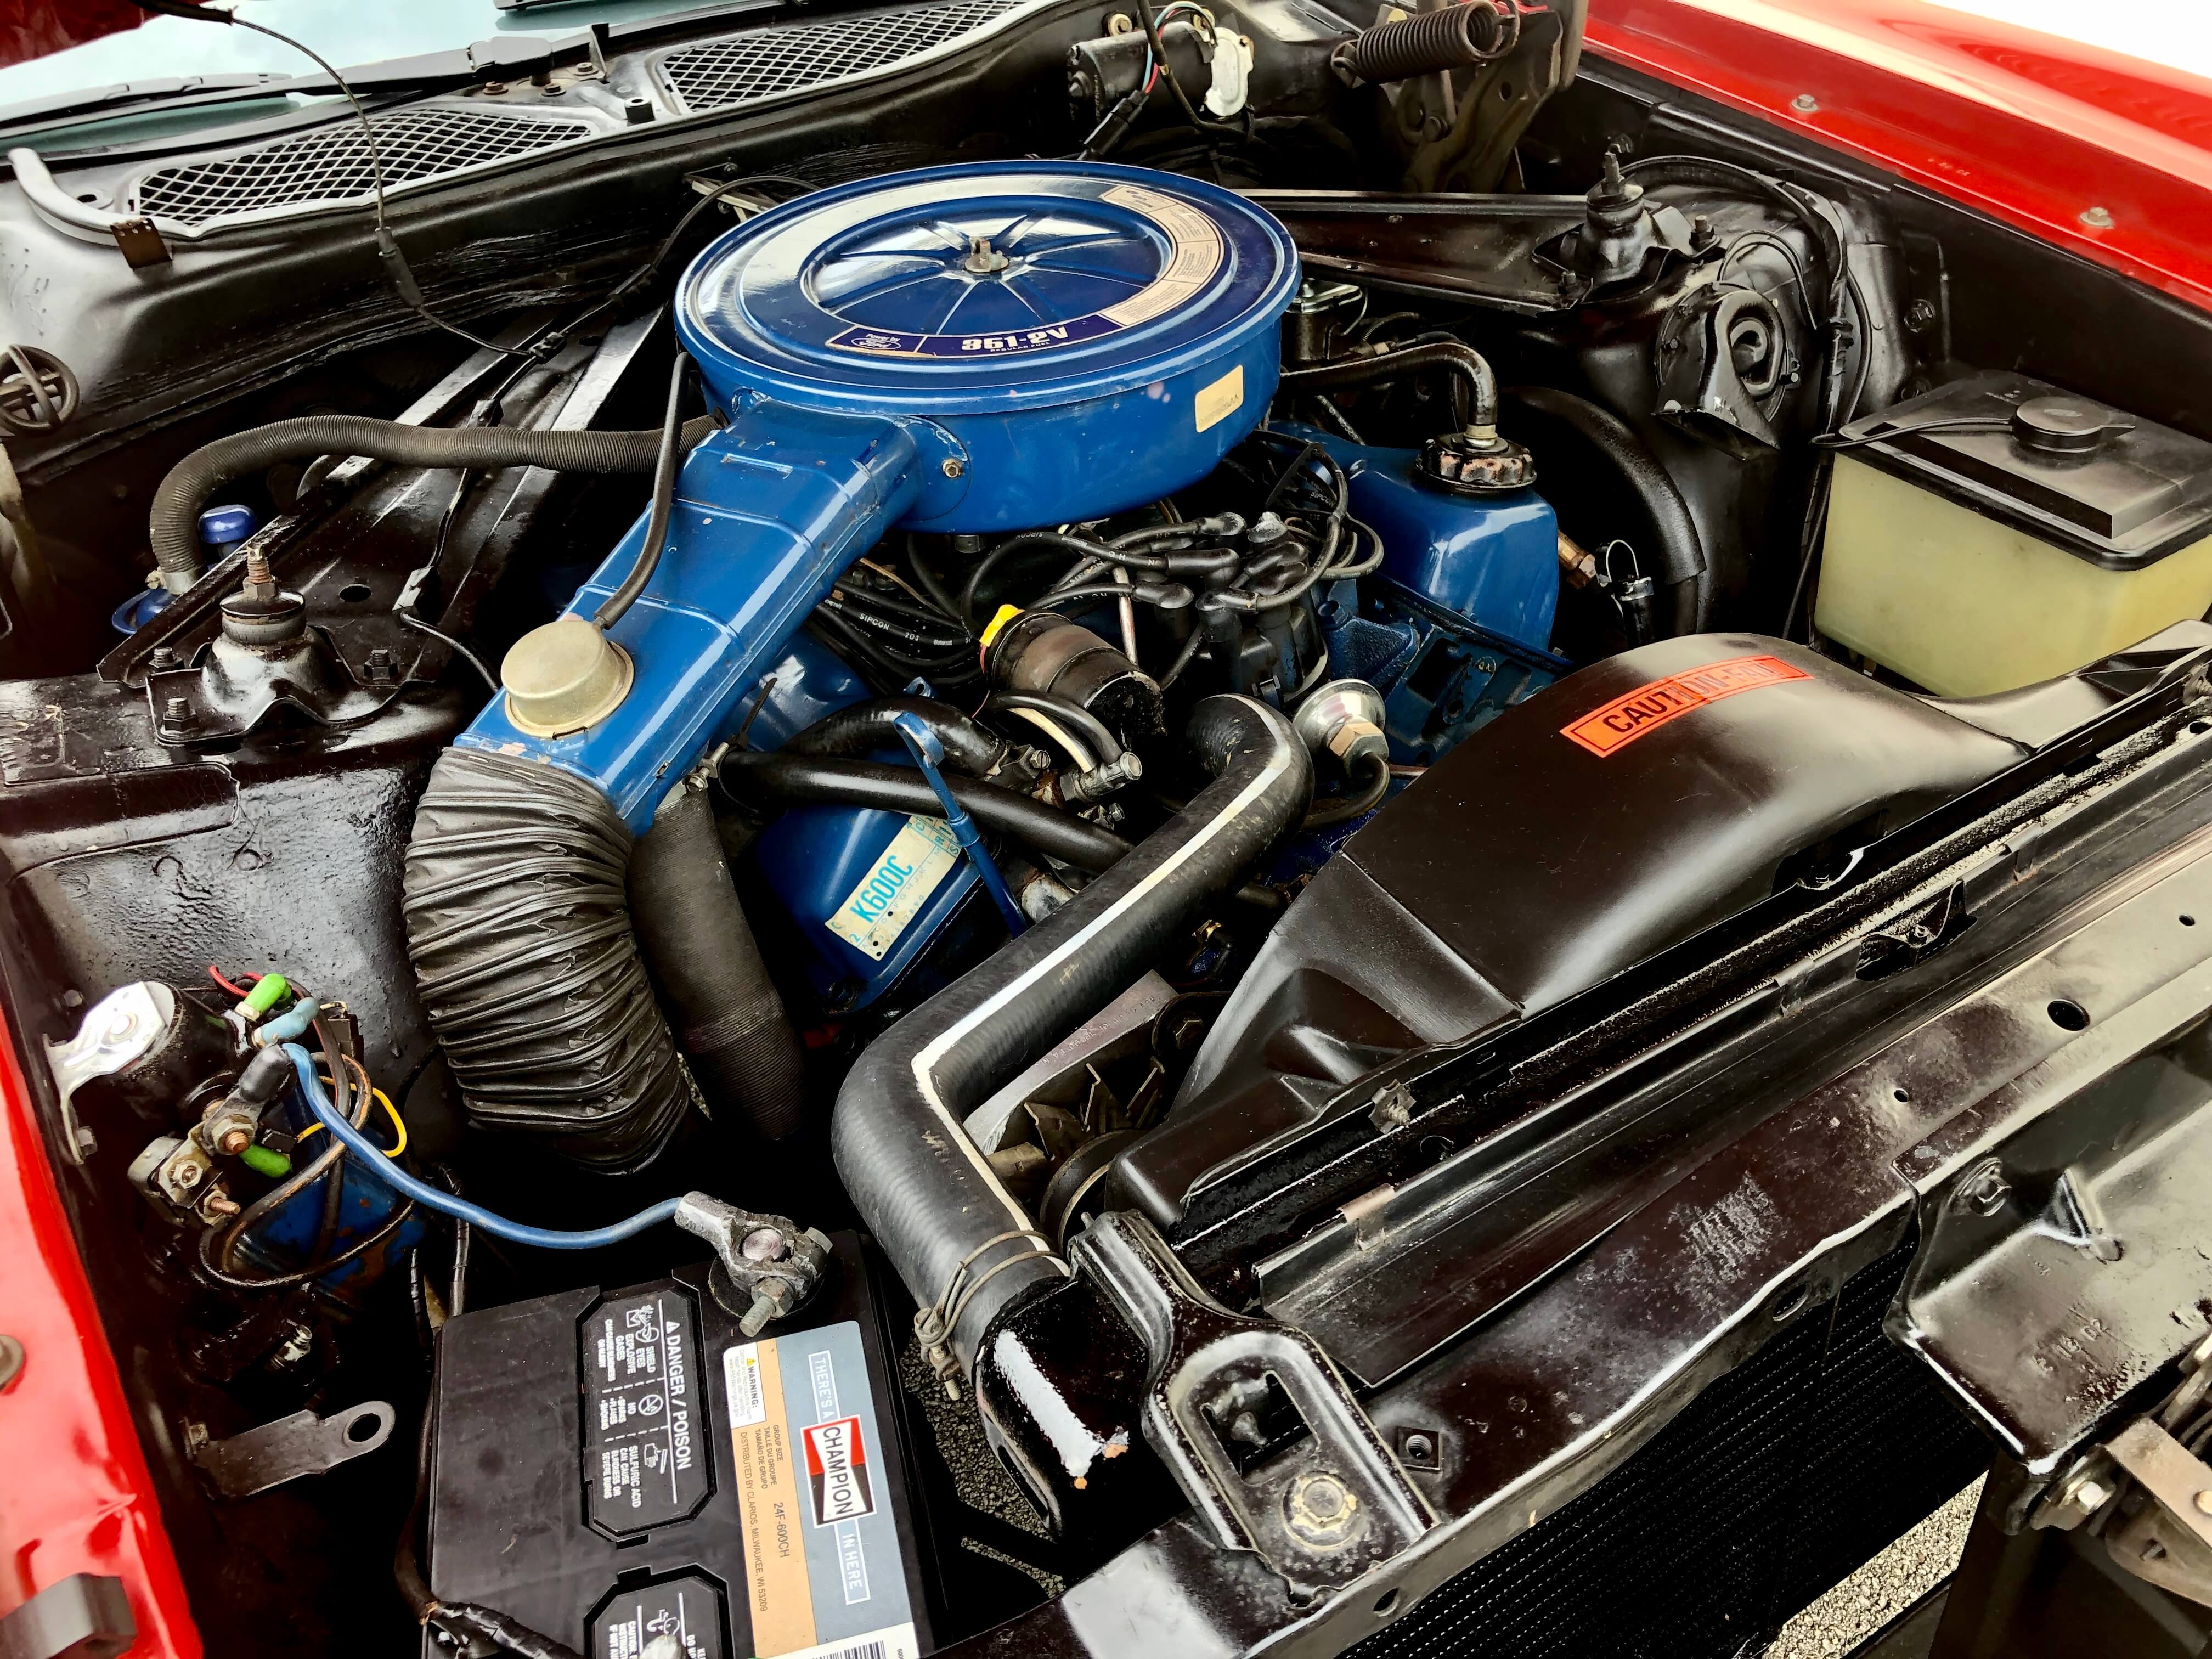 1973 Ford Mustang Convertible engine